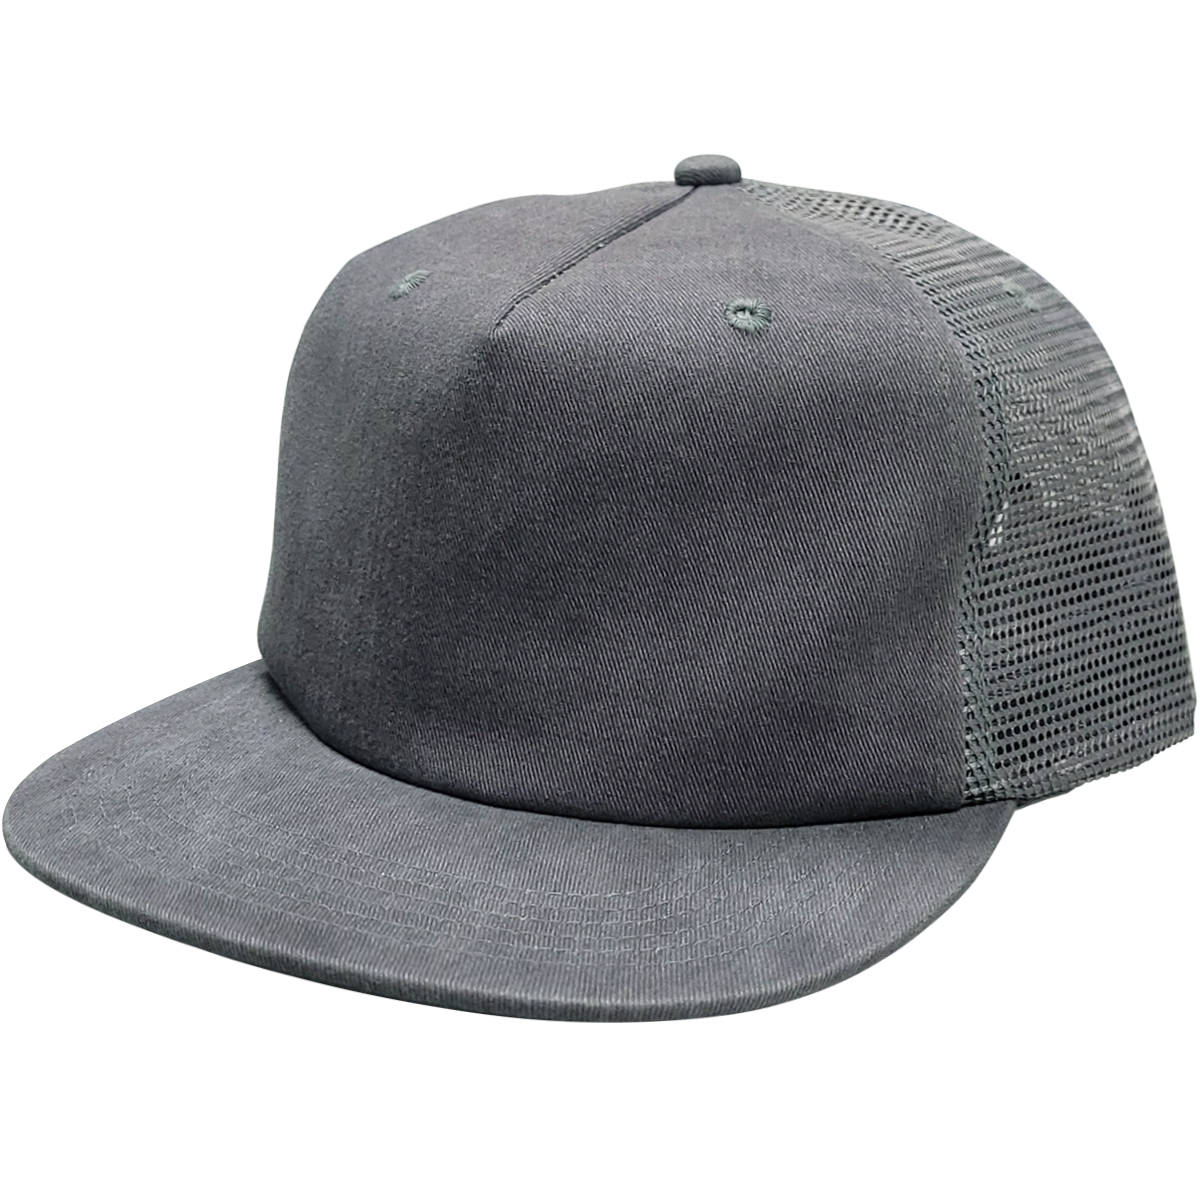 5 Panel Soft Structured - 9217